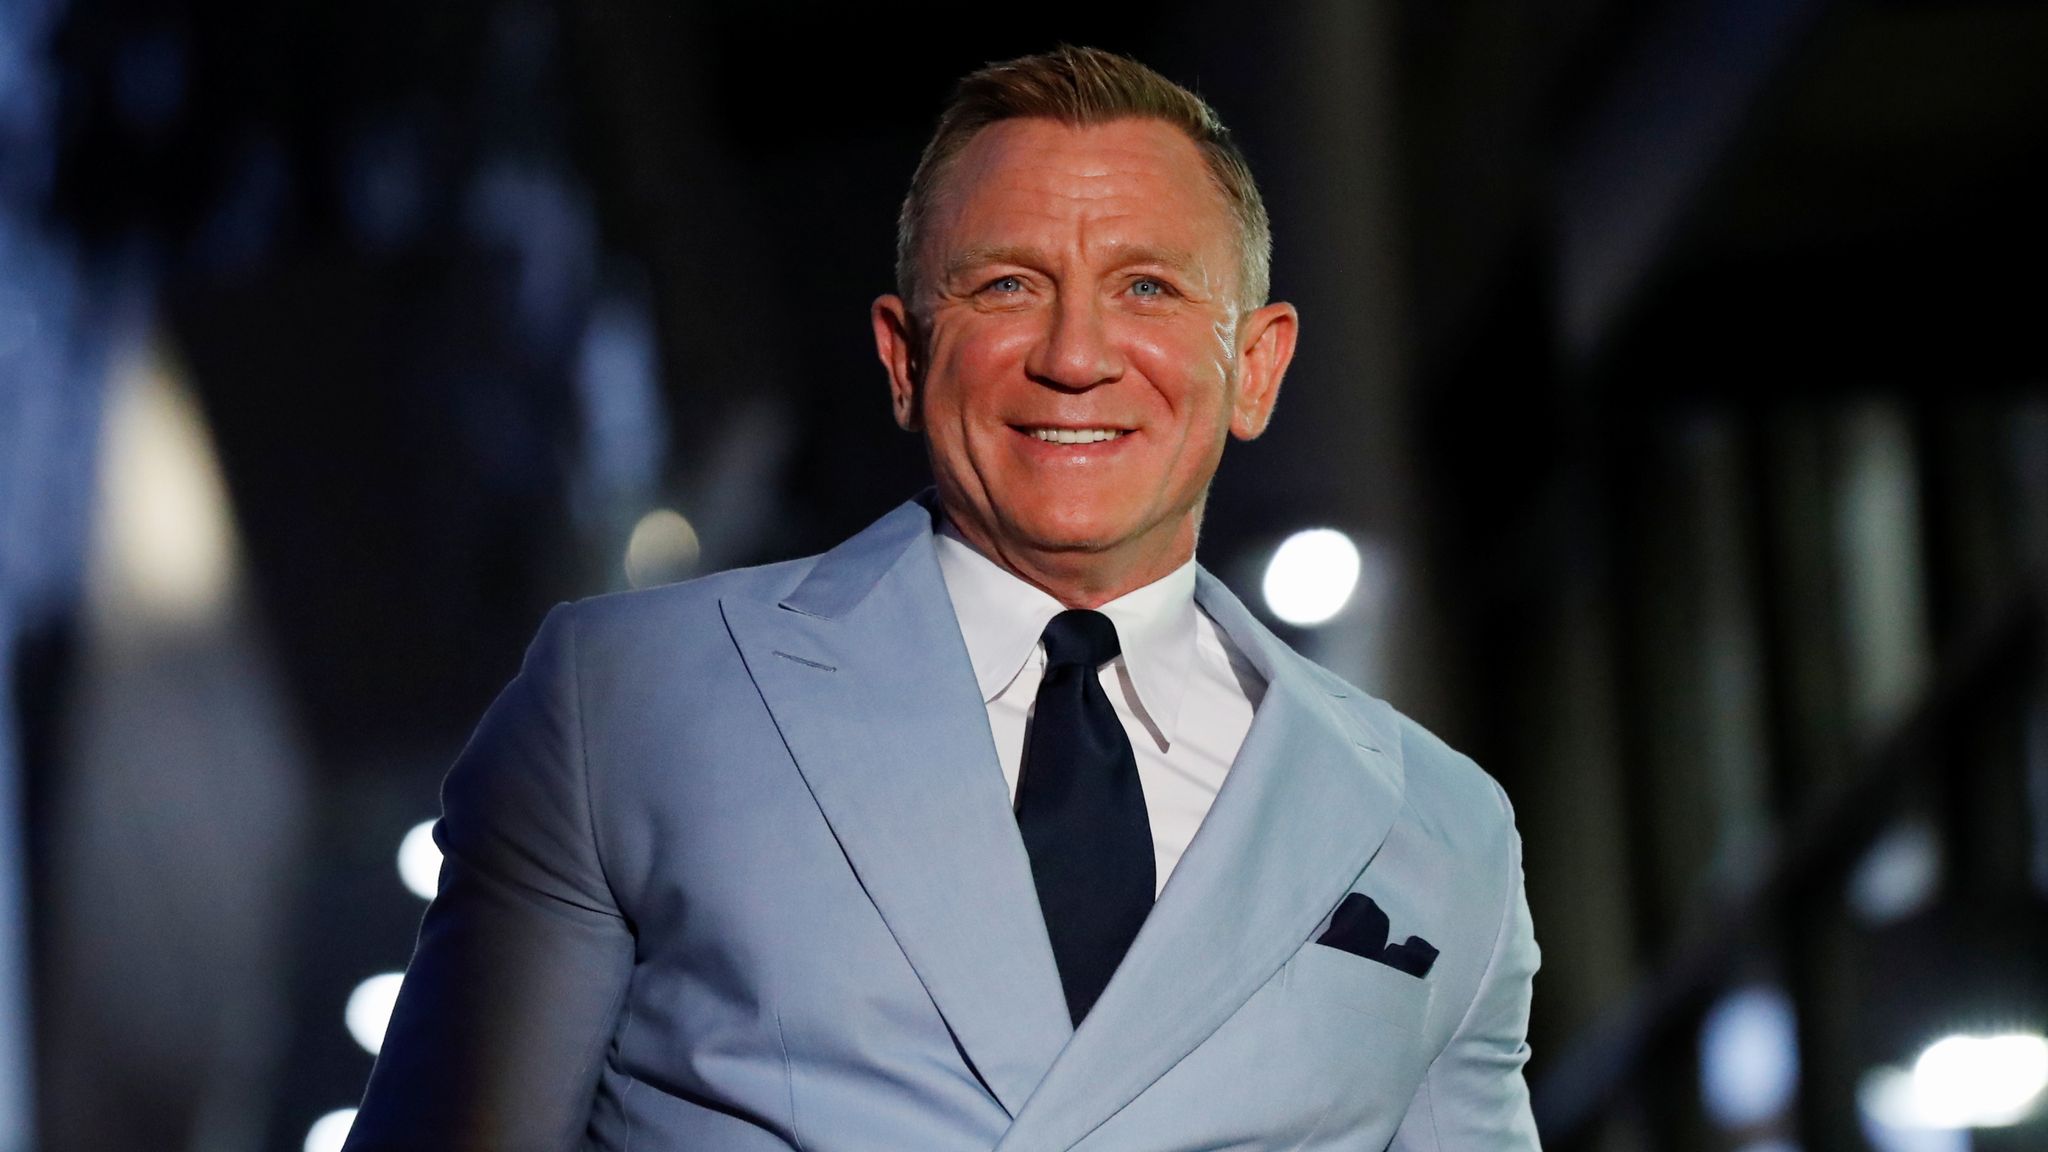 Daniel Craig James Bond star reveals why he goes to gay bars Ents and Arts News Sky News picture photo